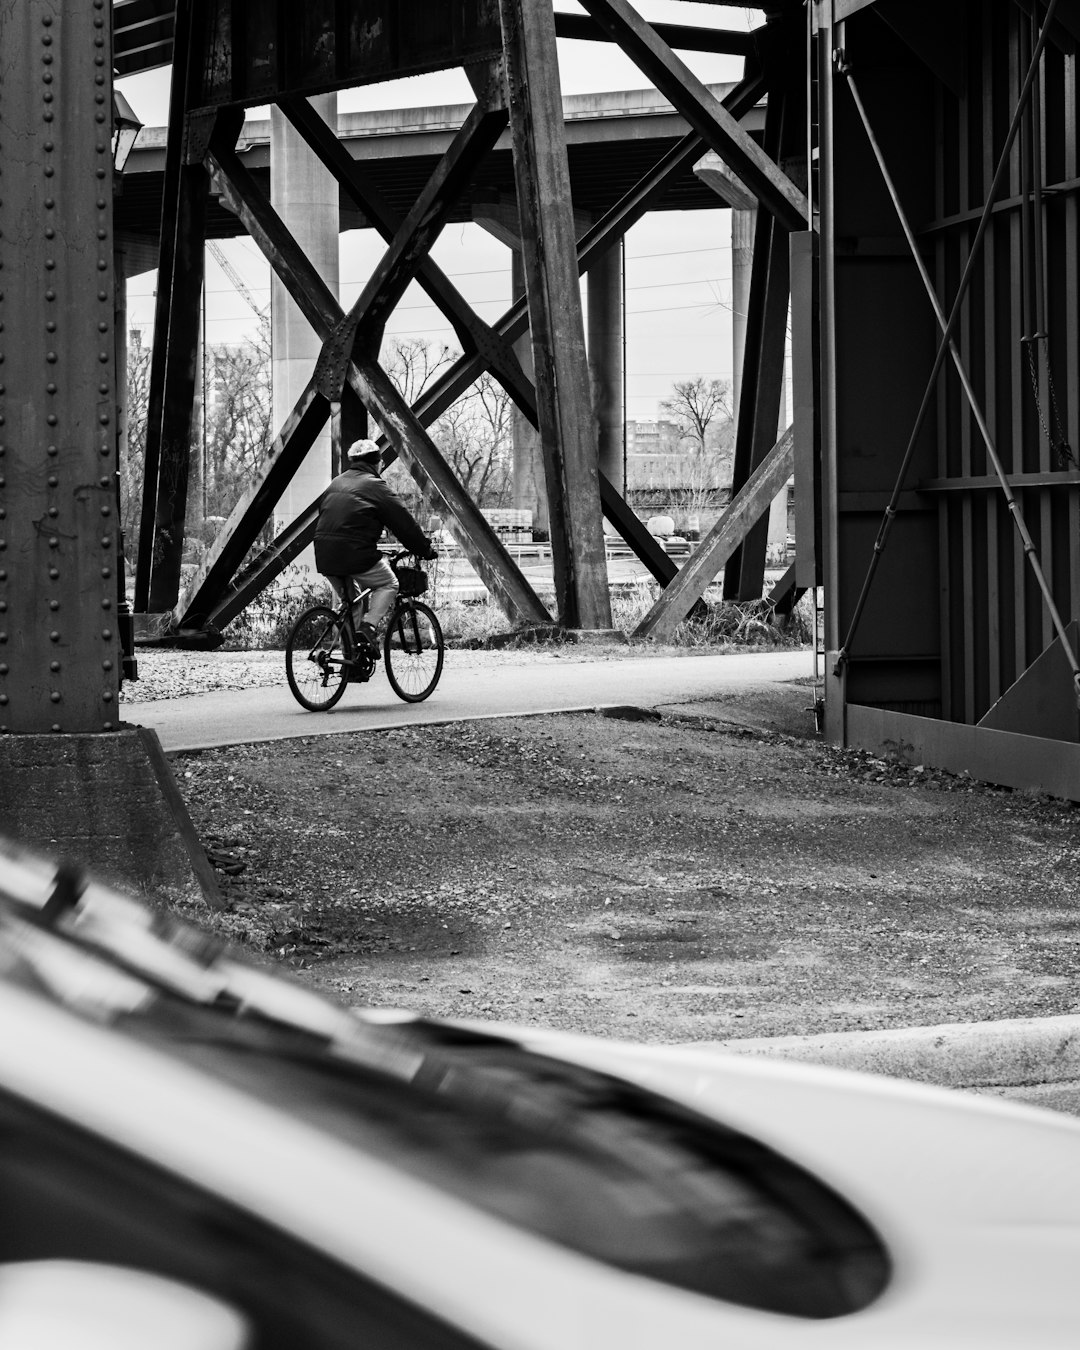 grayscale photo of man riding bicycle on road near bridge